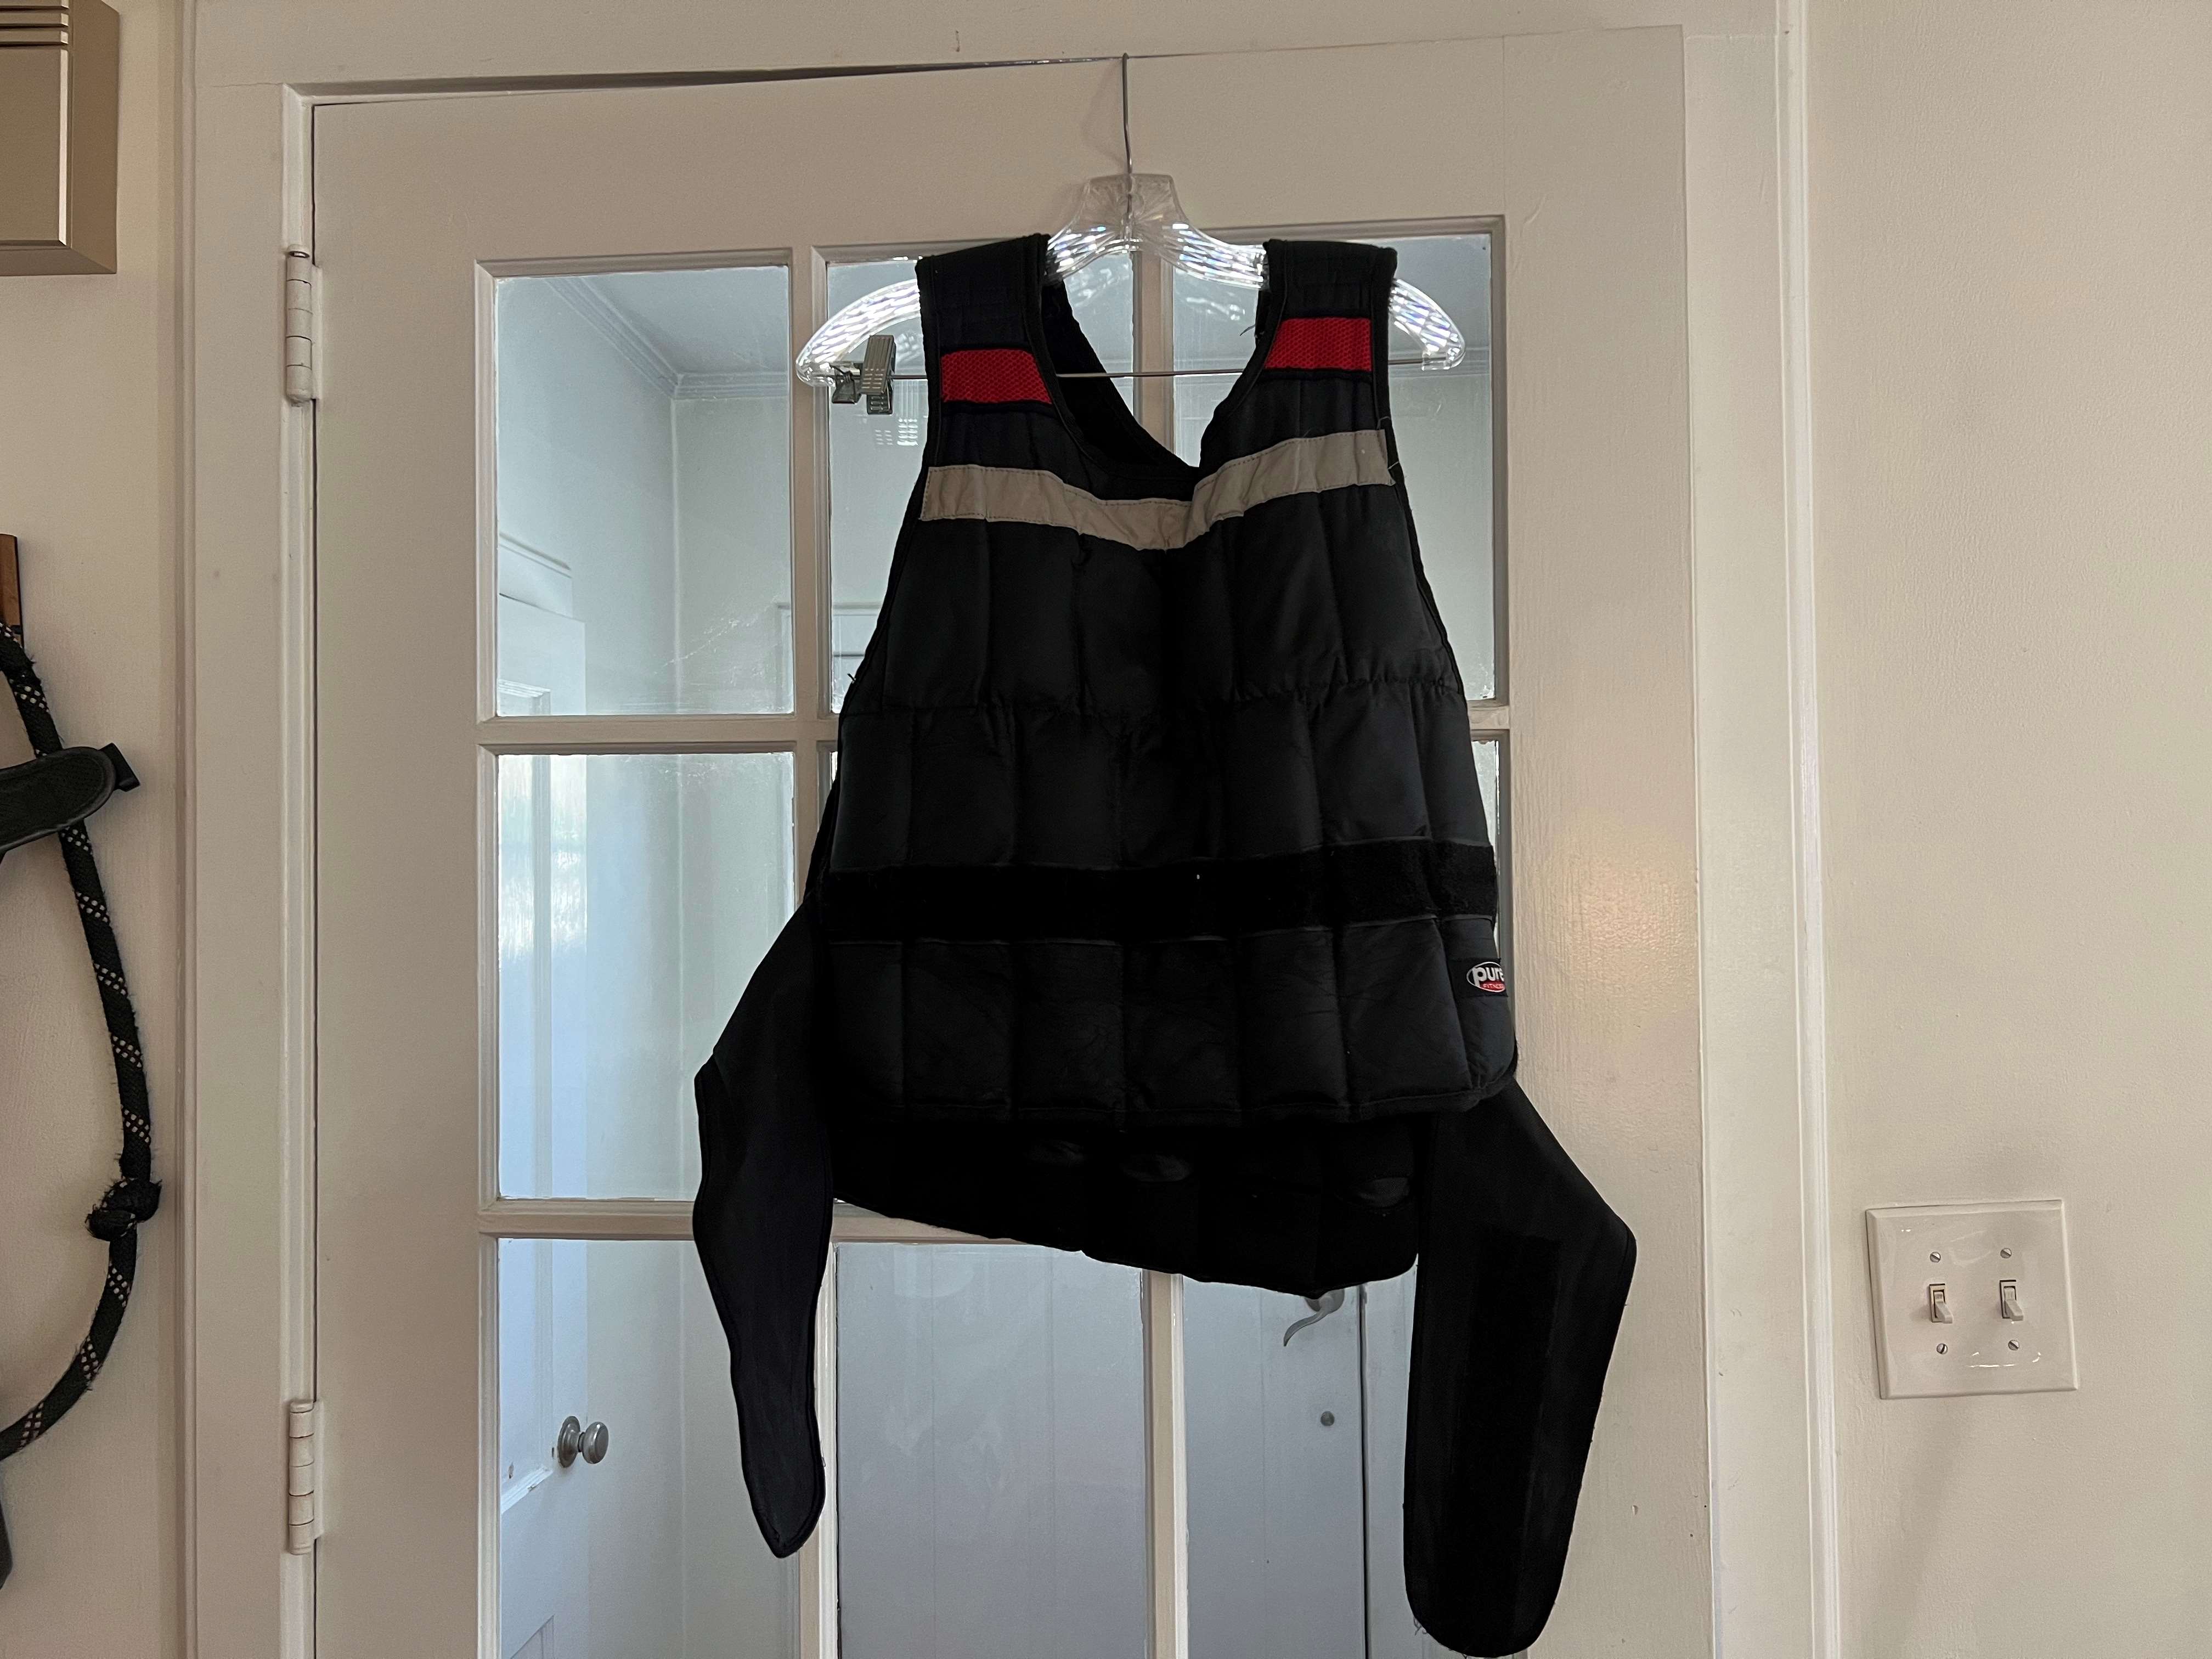 A weighted vest on a hanger